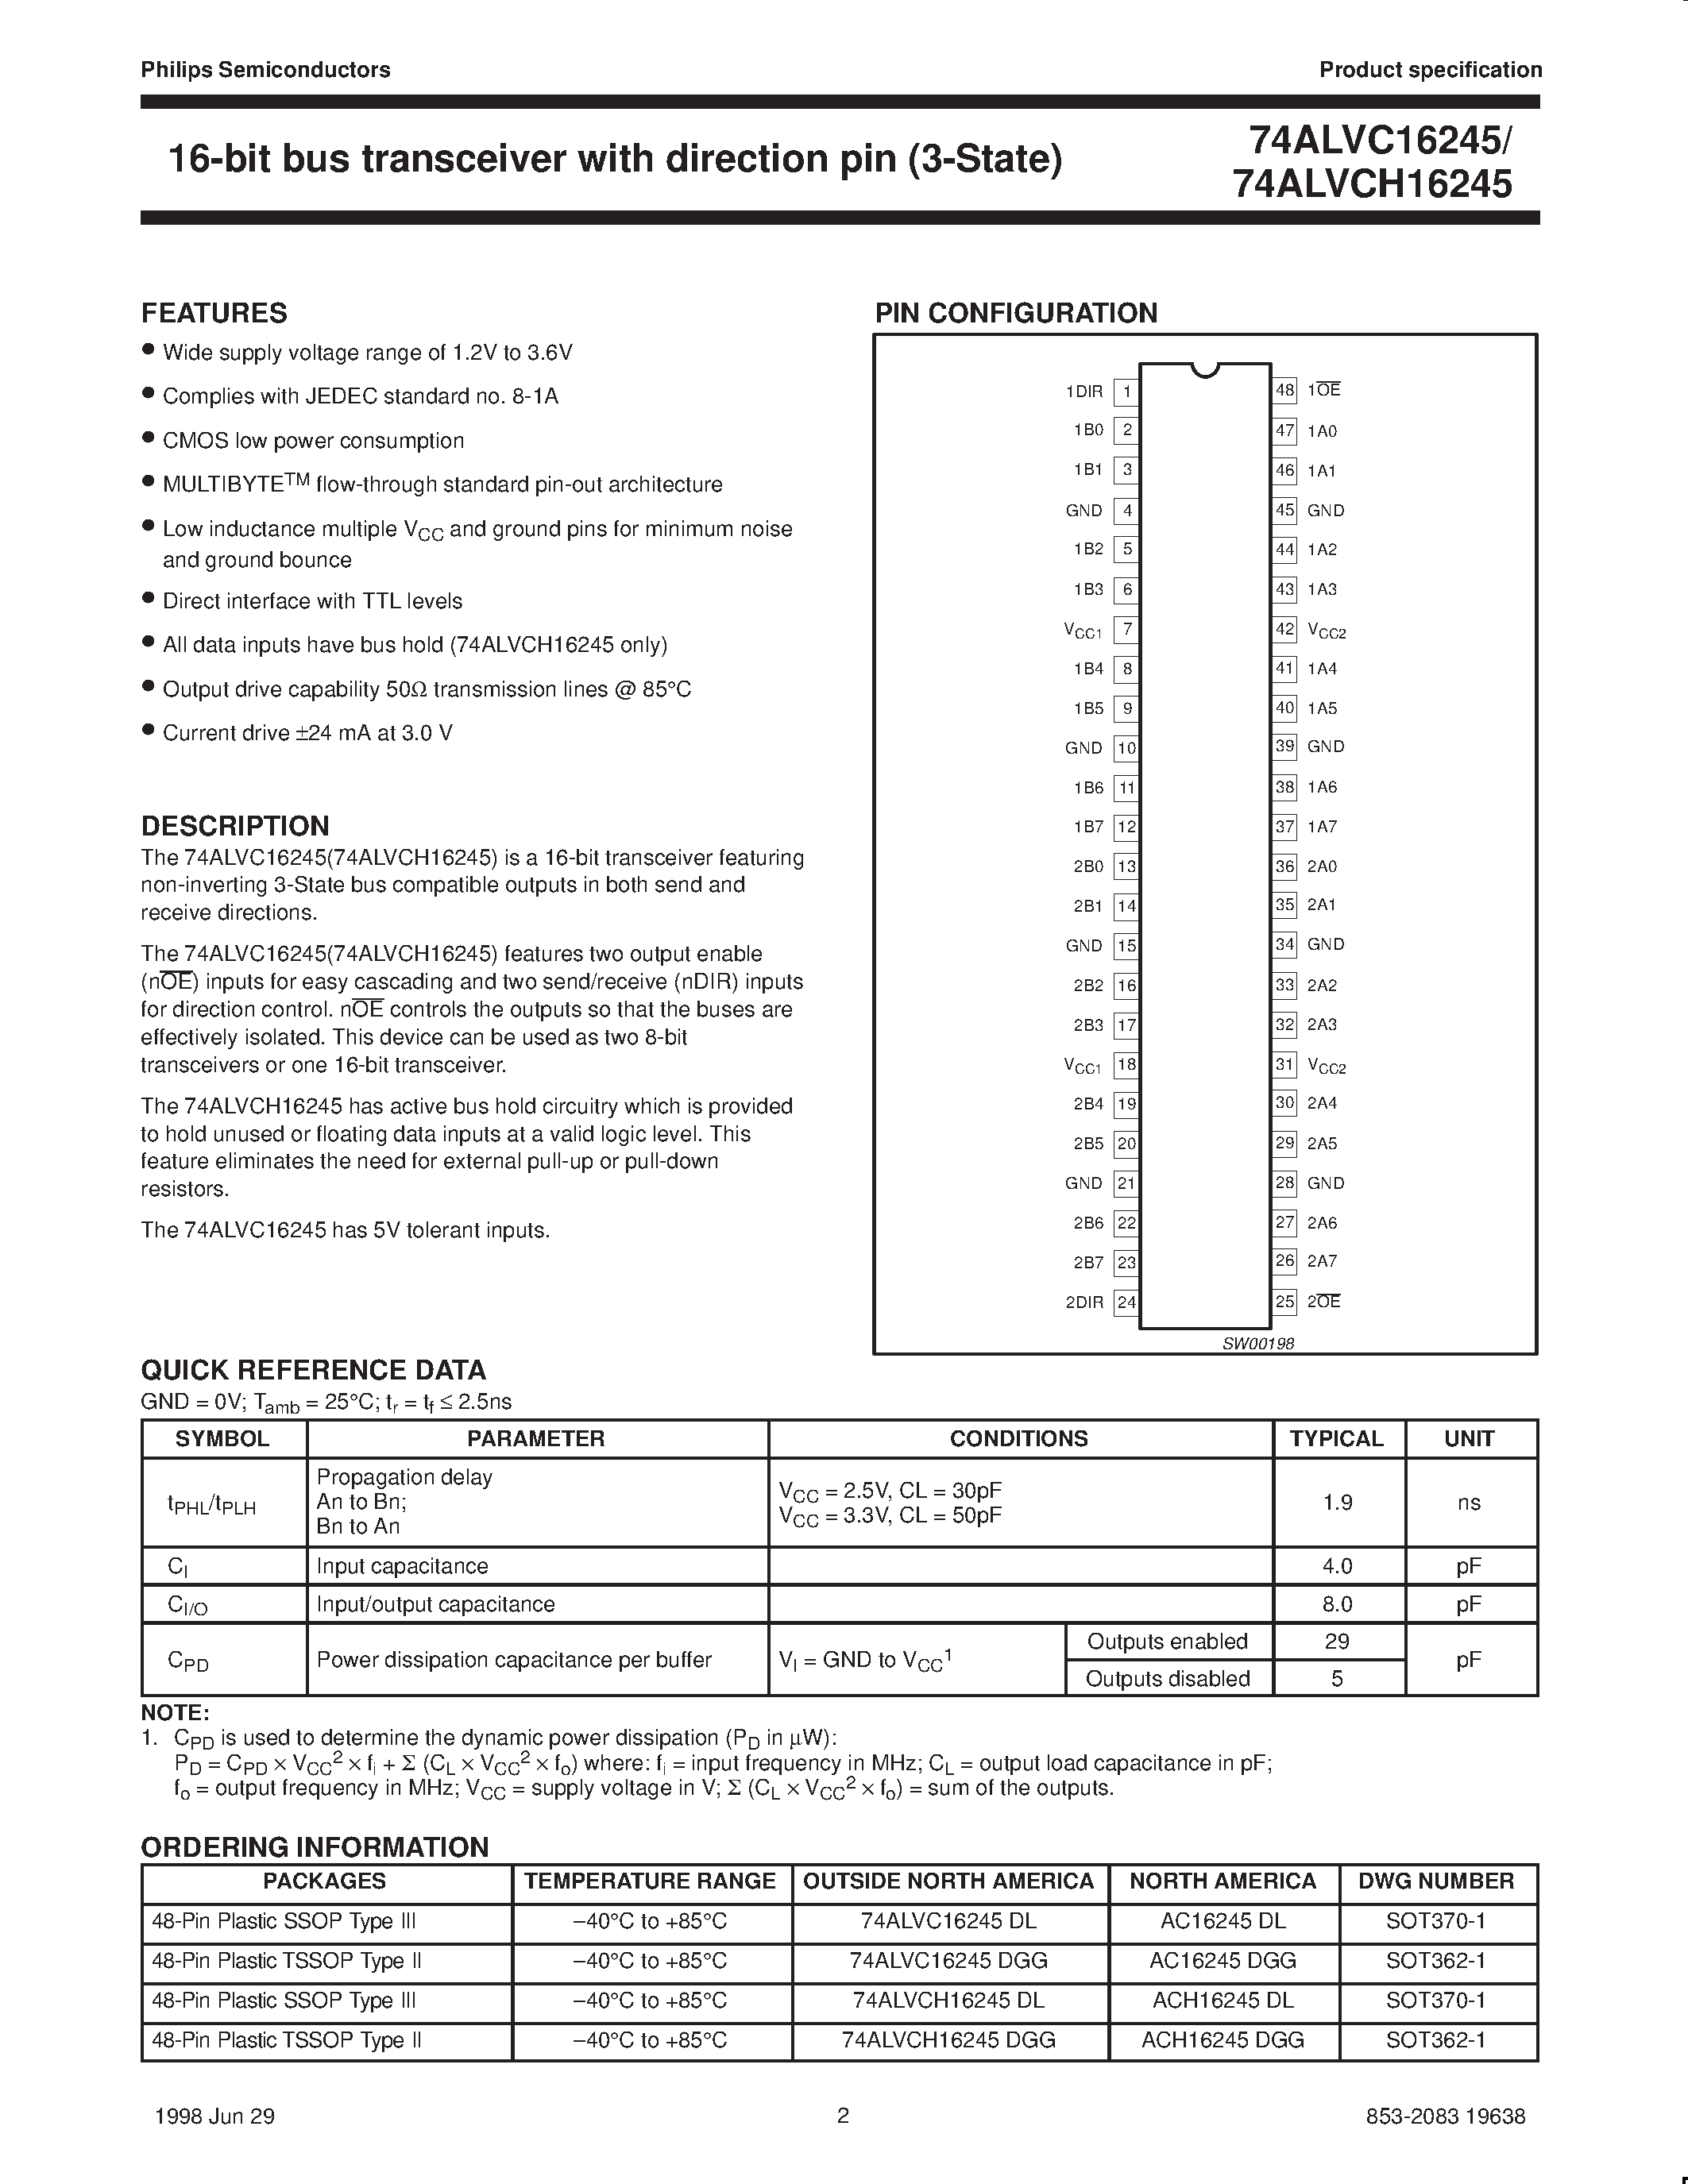 Datasheet 74ALVCH16245DL - 2.5V/3.3V 16-bit bus transceiver with direction pin 3-State page 2